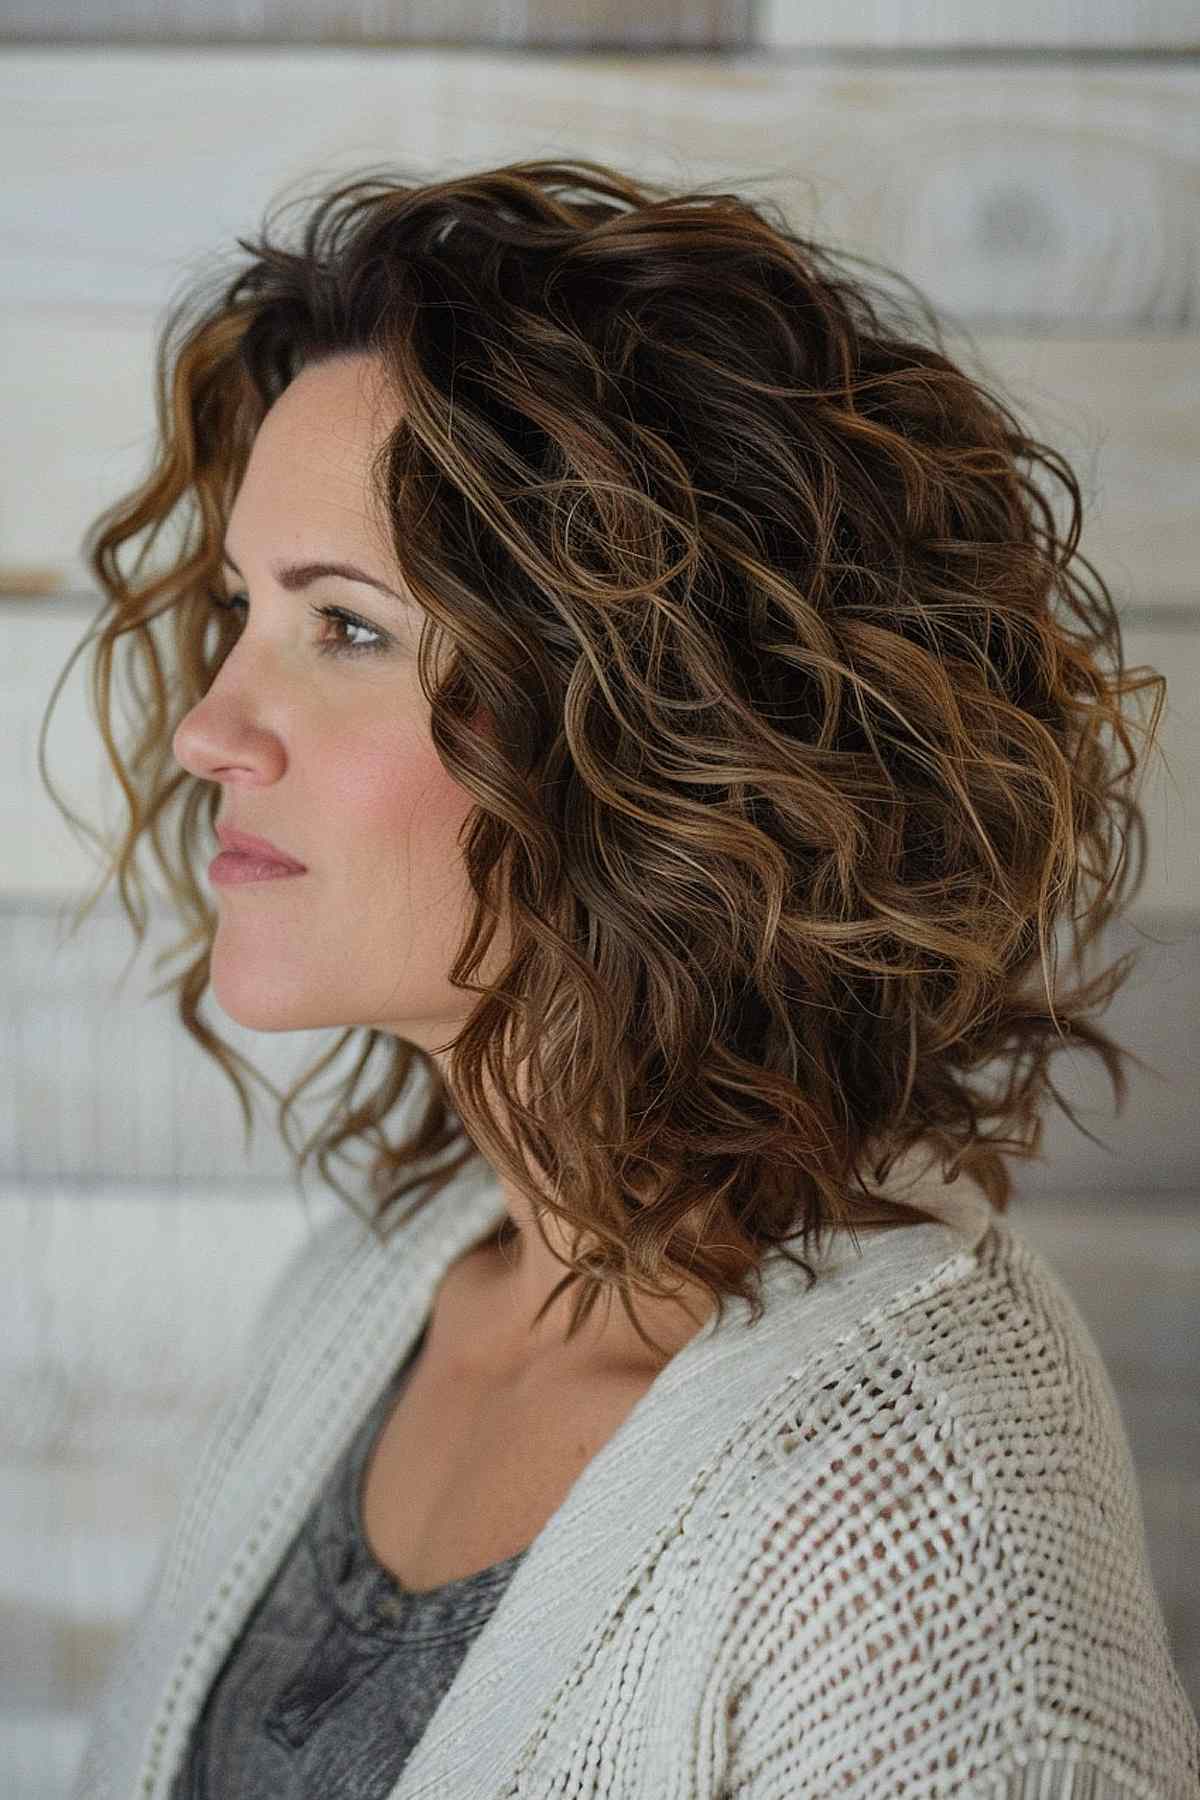 Stacked bob haircut highlighting natural curly texture with balayage" to include important context and directly tie it to the article's content